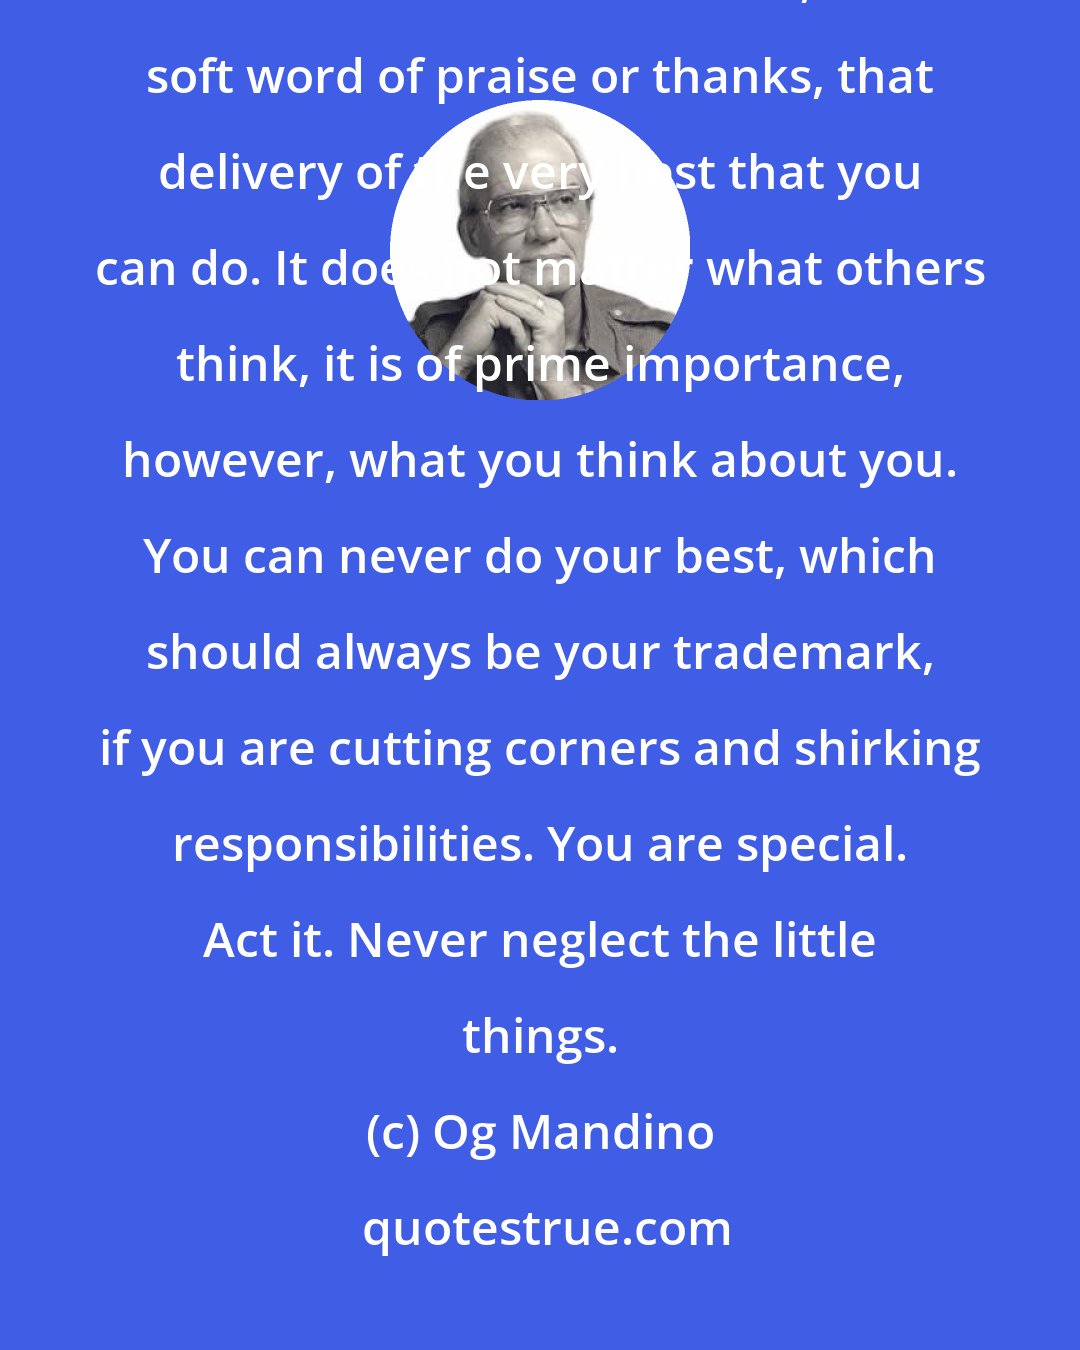 Og Mandino: Never neglect the little things. Never skimp on that extra effort, that additional few minutes, that soft word of praise or thanks, that delivery of the very best that you can do. It does not matter what others think, it is of prime importance, however, what you think about you. You can never do your best, which should always be your trademark, if you are cutting corners and shirking responsibilities. You are special. Act it. Never neglect the little things.